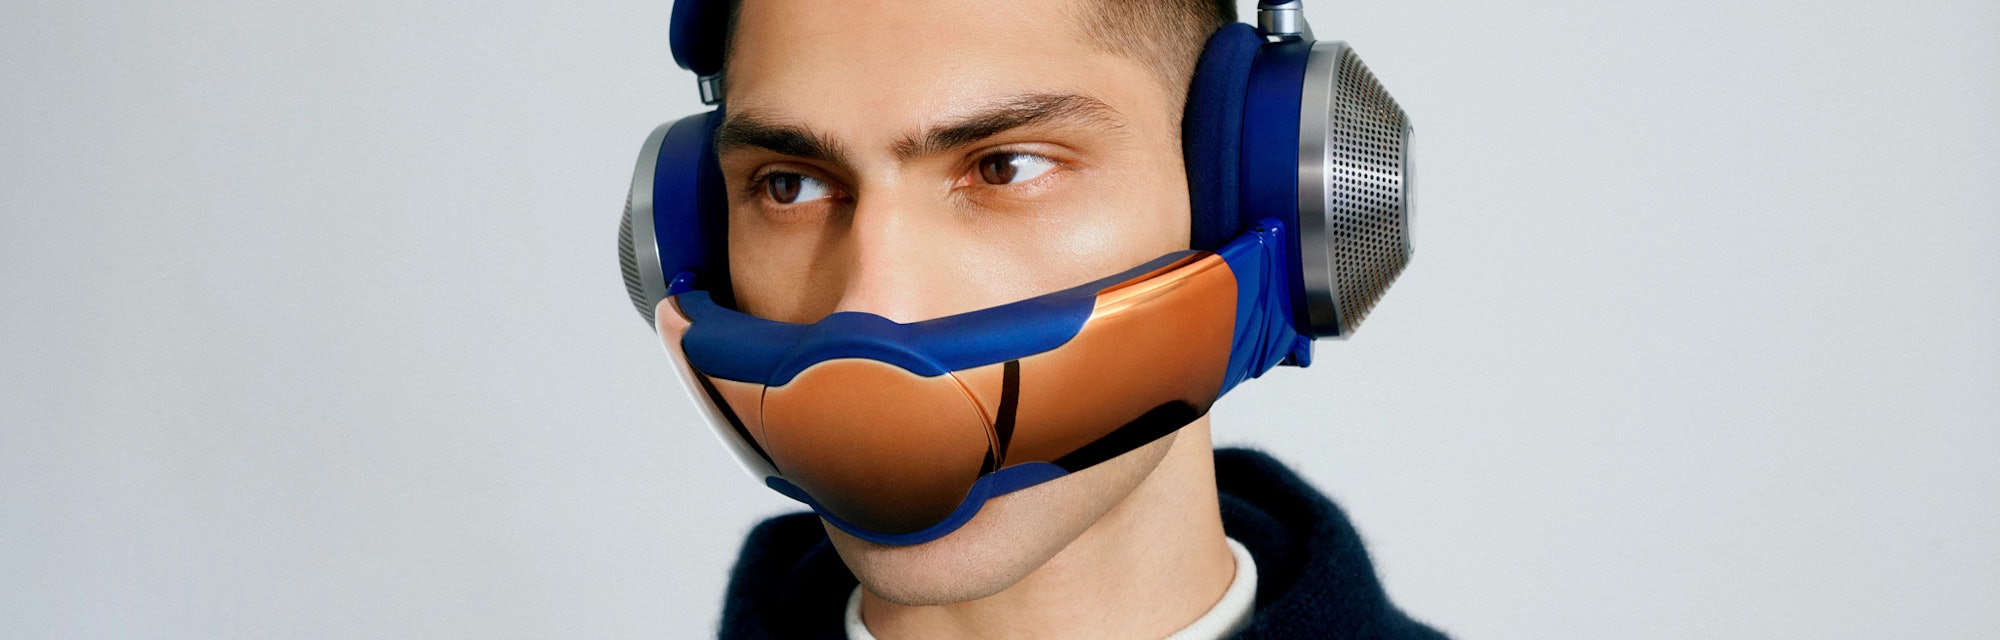 Dyson Zone headphones with noise cancellation and air purification